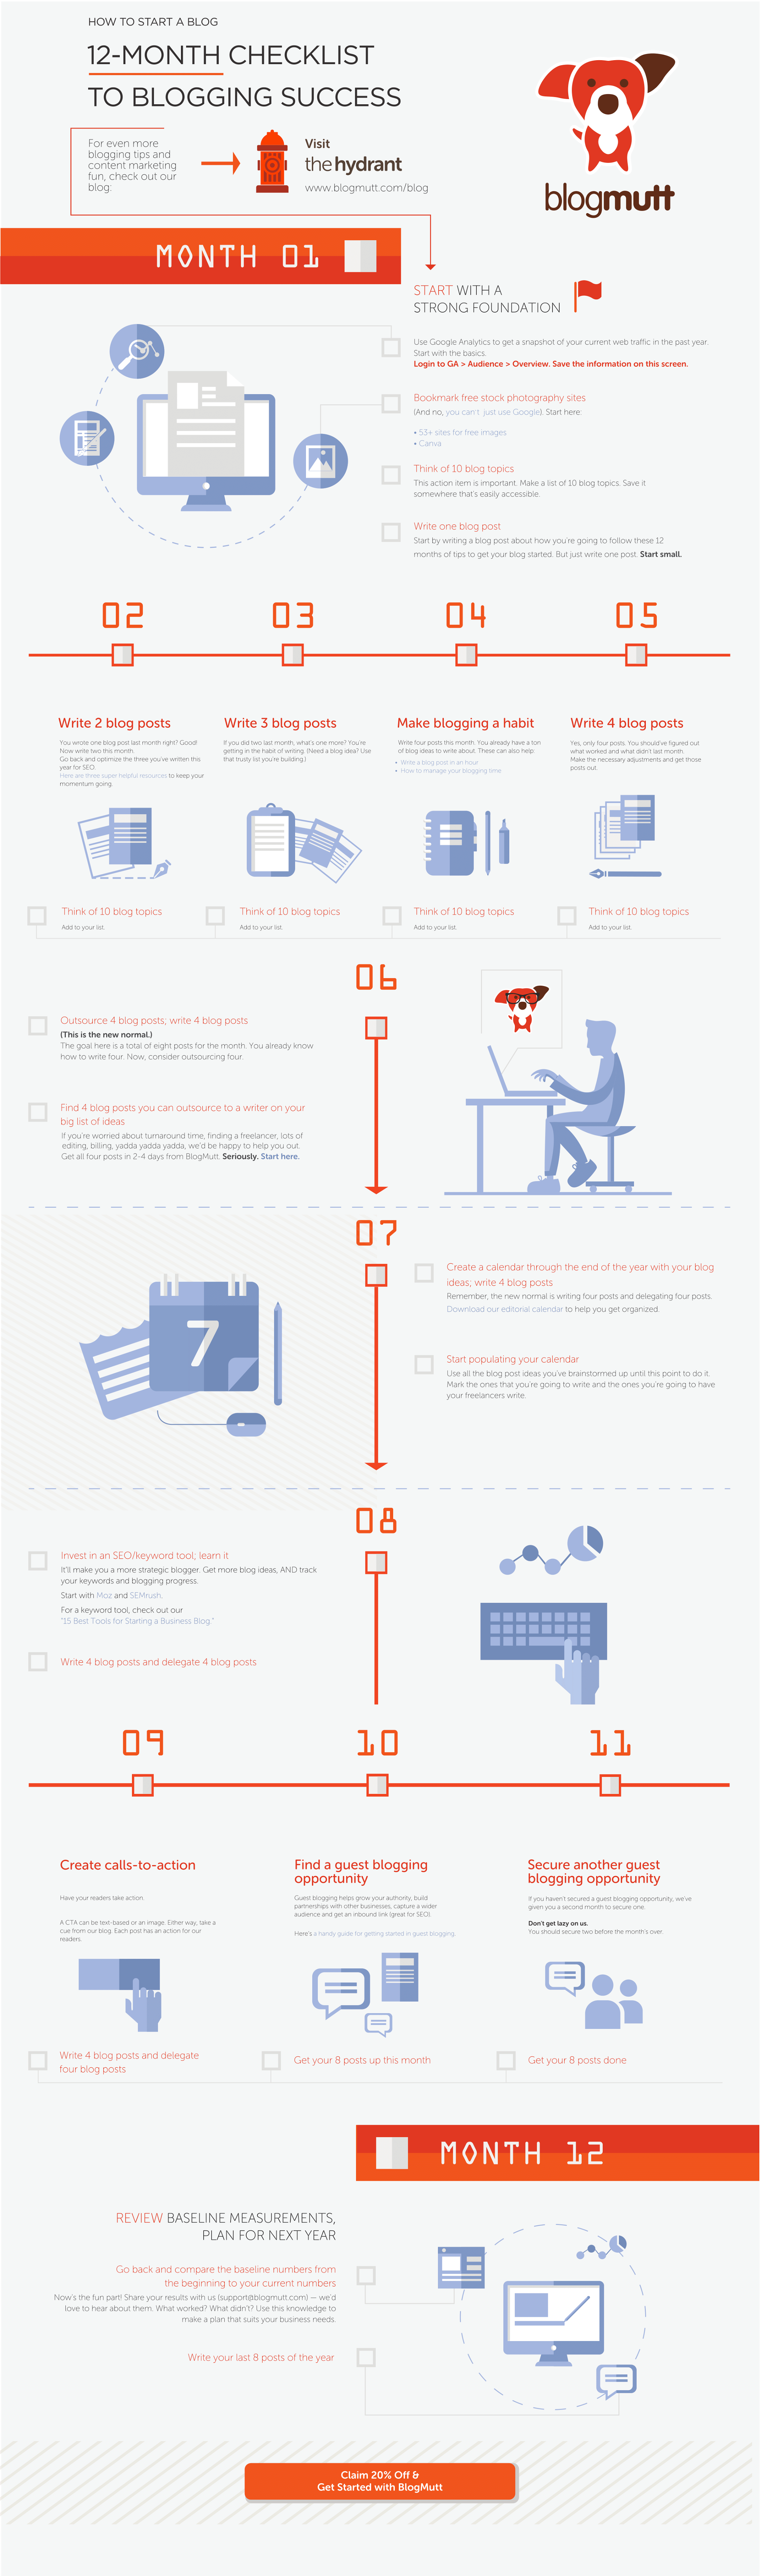 How To Start A Blog: The 12-Month Checklist - #Infographic